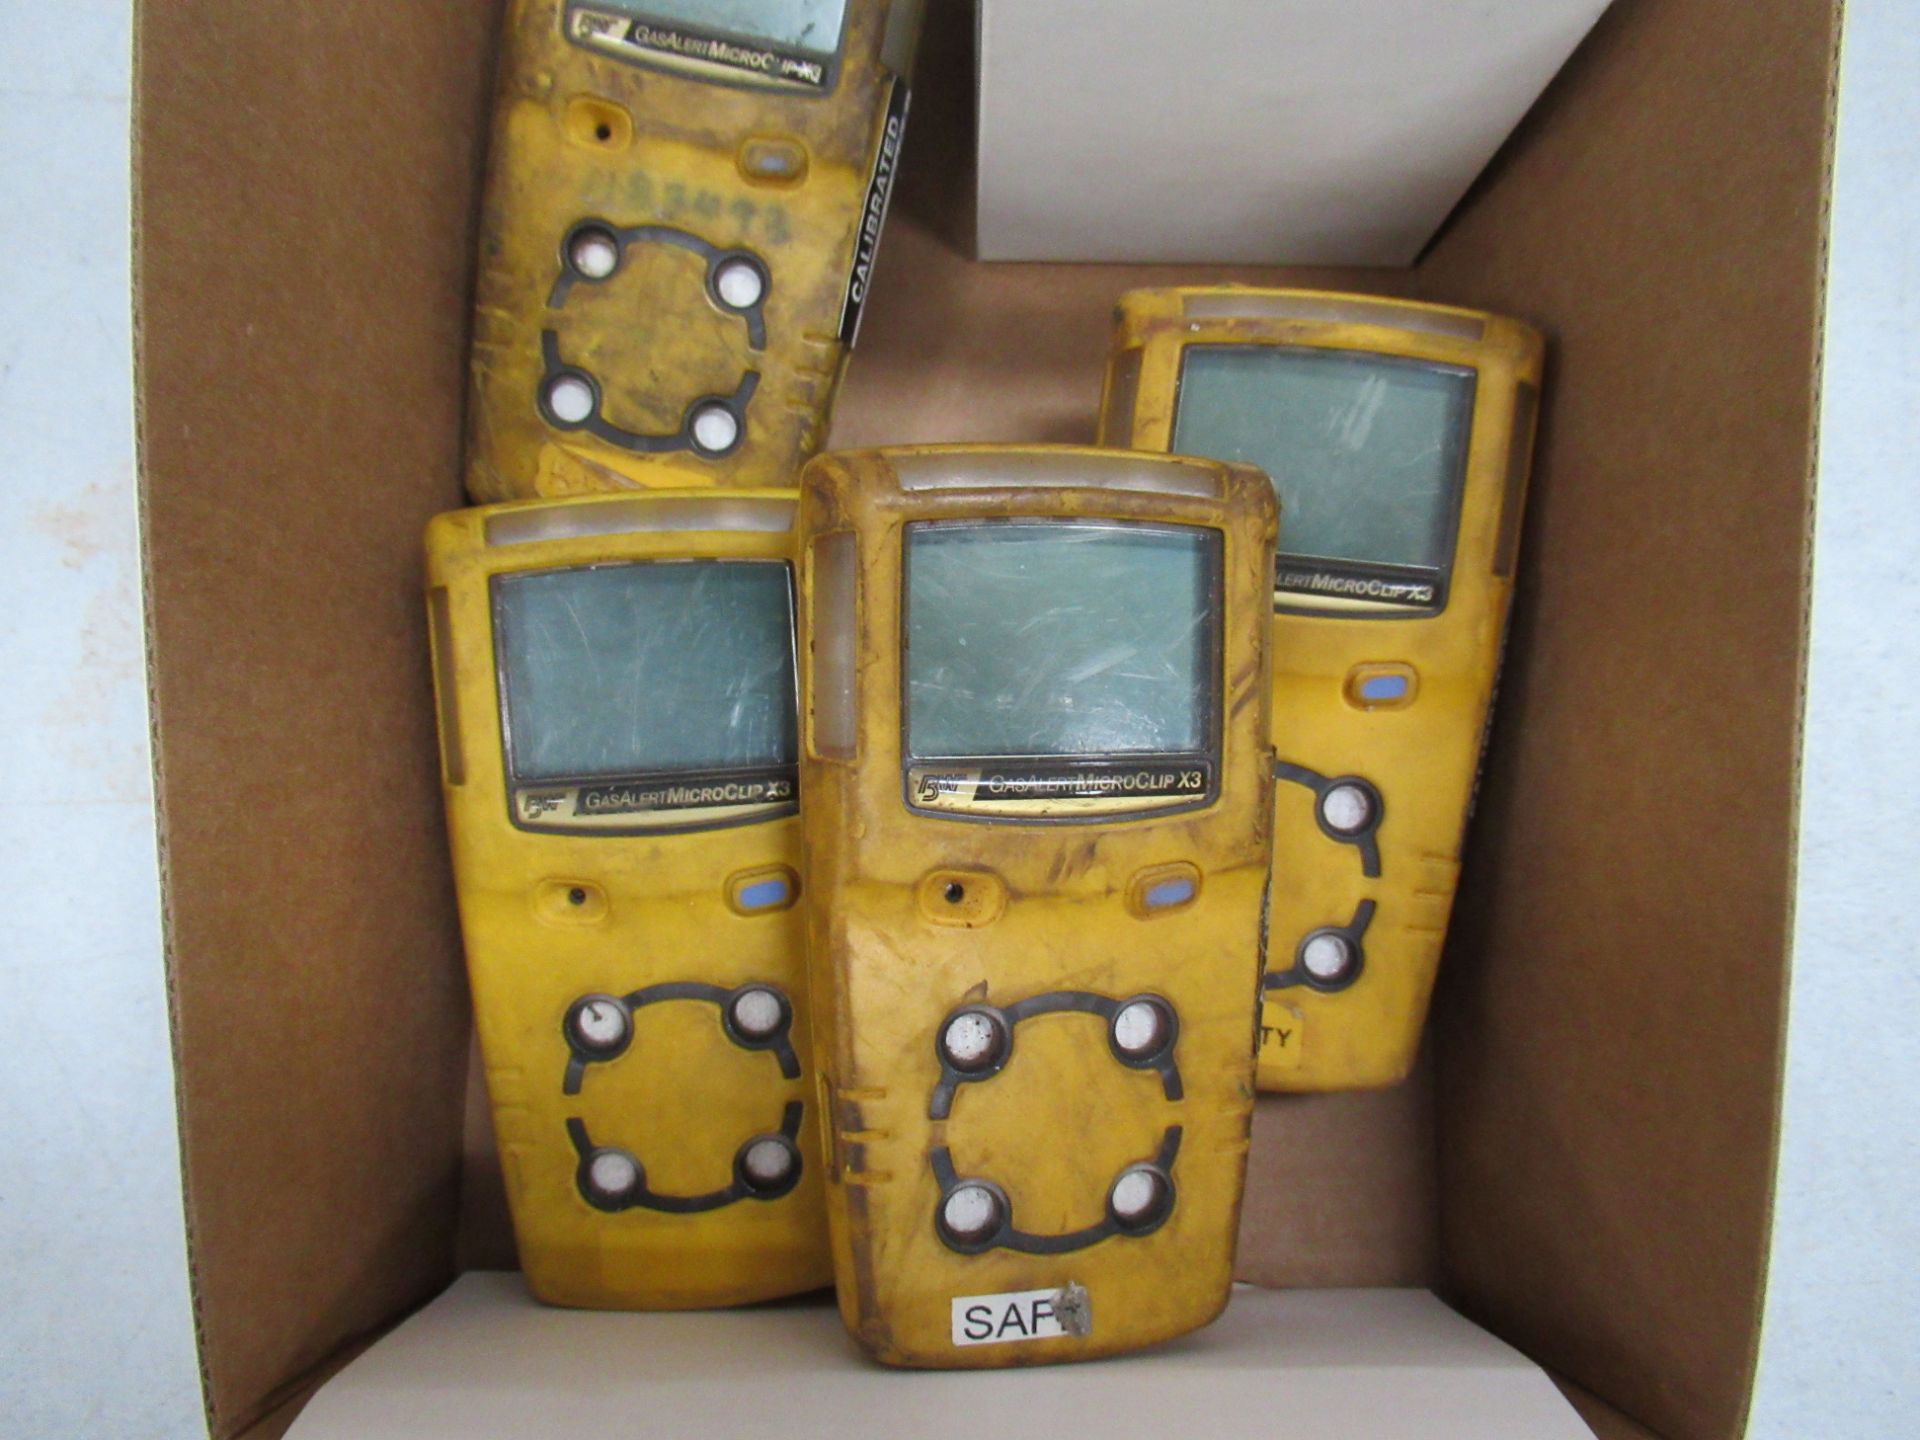 4x BW (By Honeywell) Gas Alert MicroClip X3 Detectors - Image 2 of 2